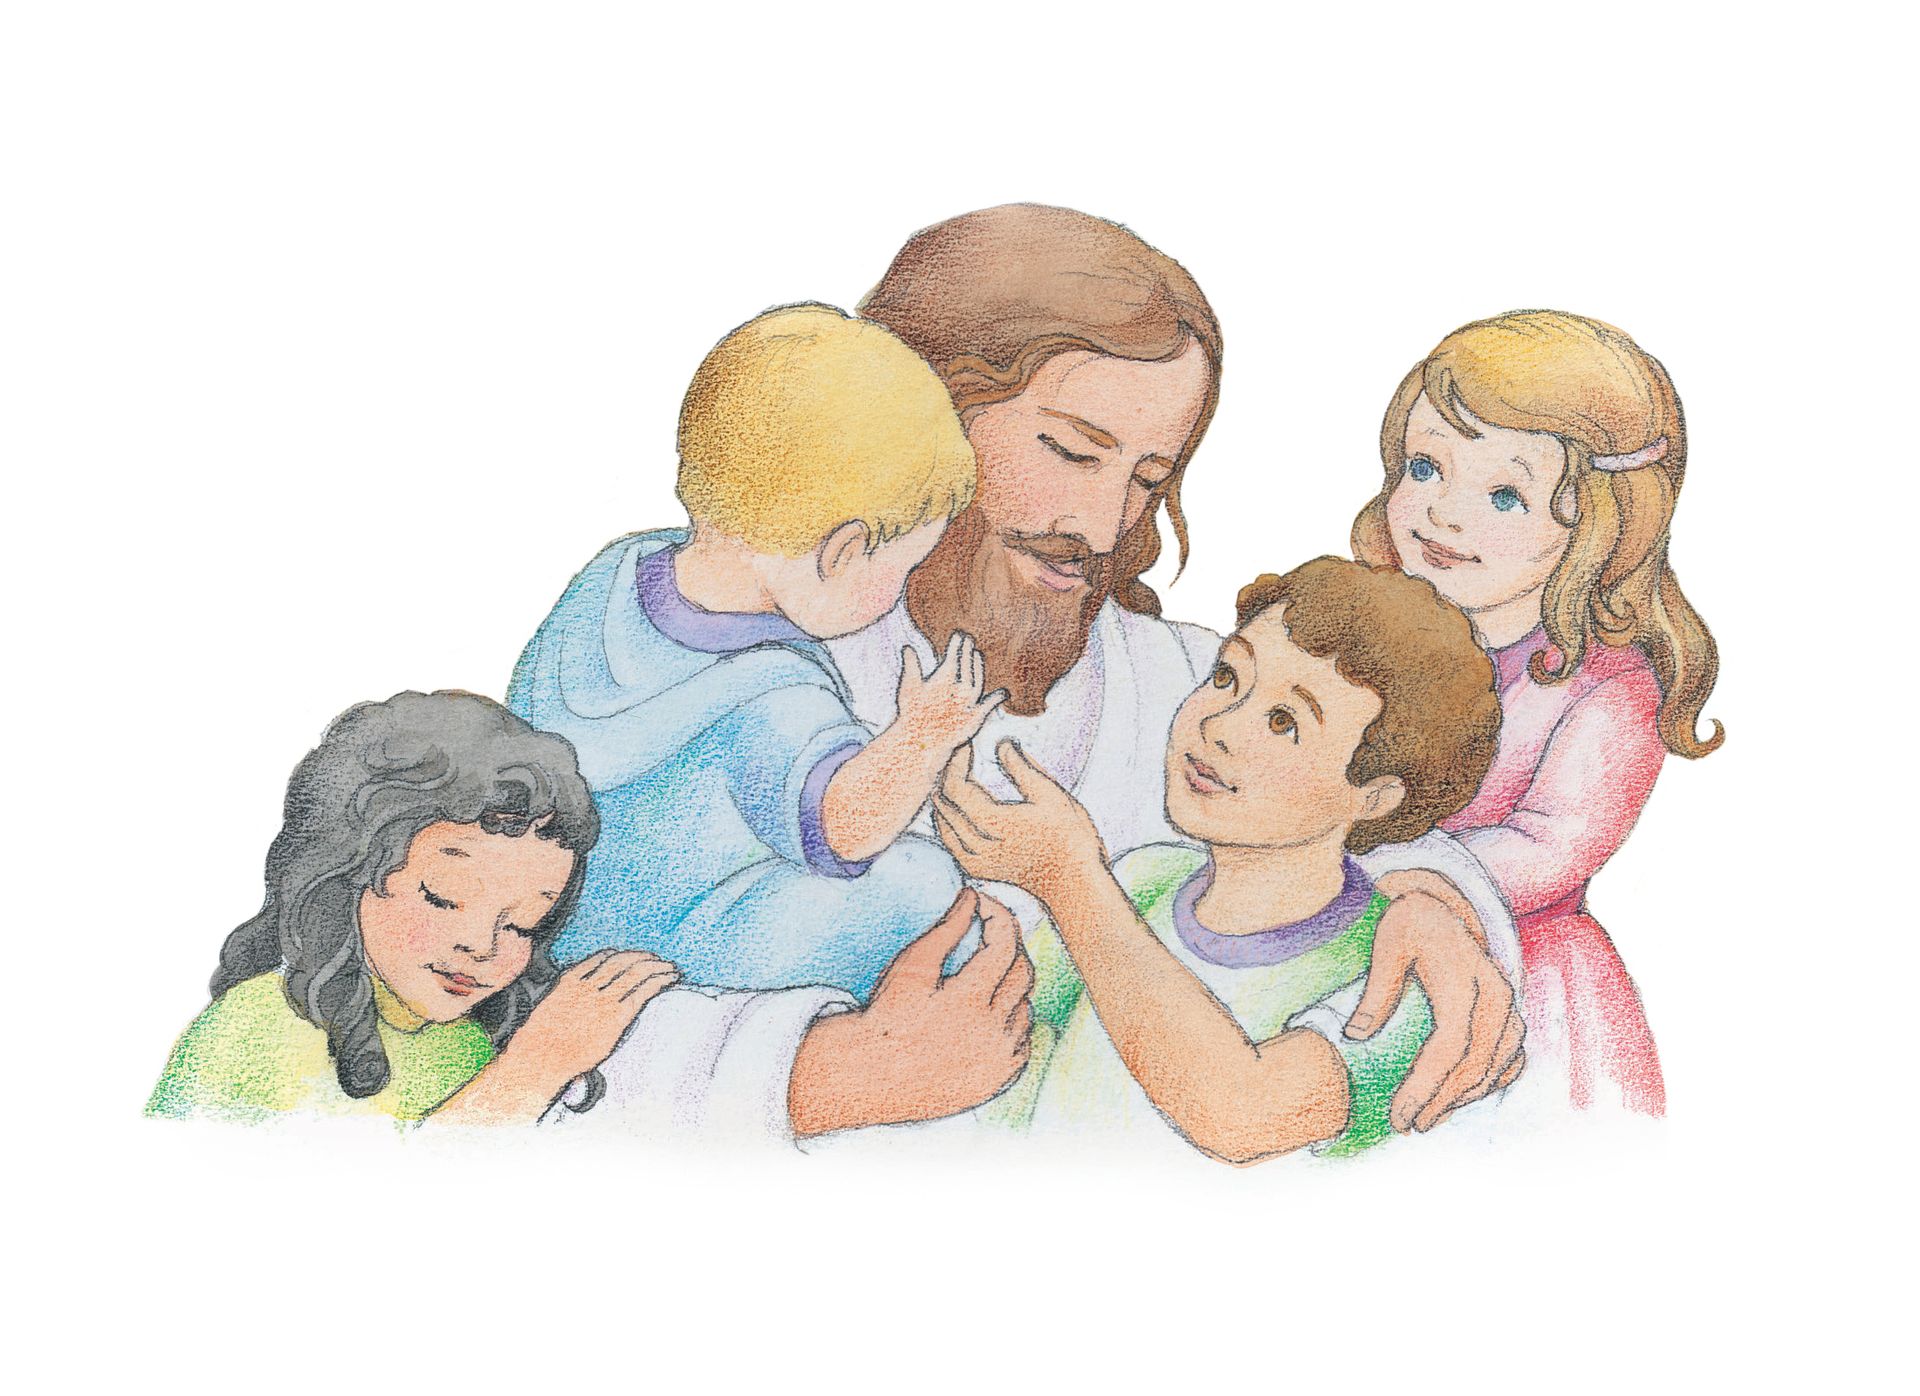 jesus christ with children clipart showing